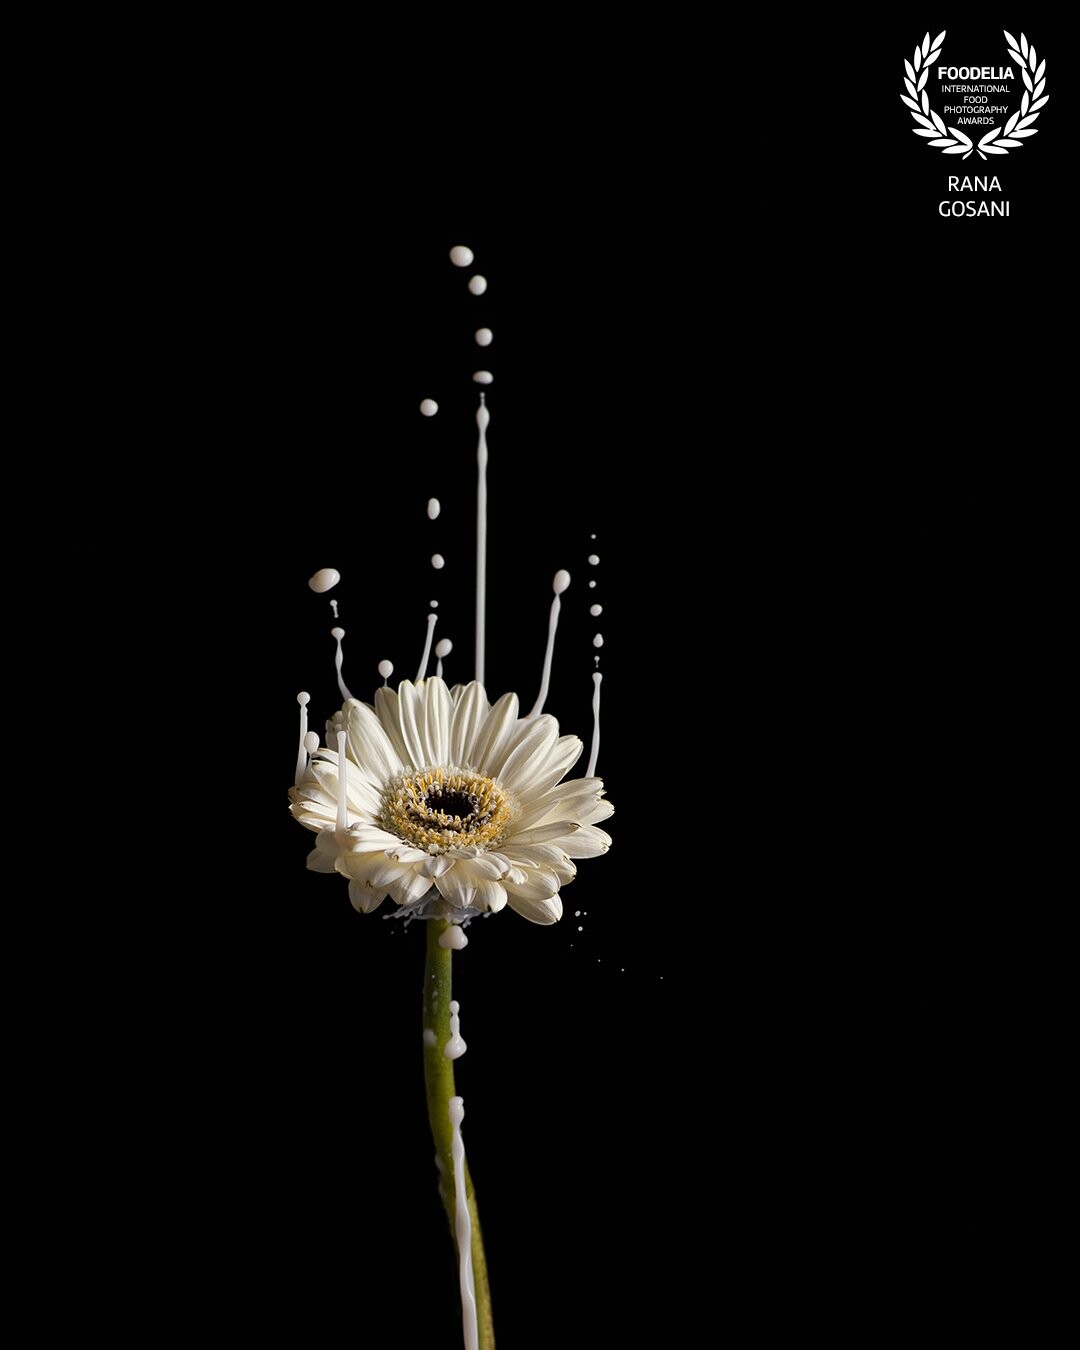 This photo represents simplicity in a beauty.  Lonely flower that stays pure even in the darkest times.  Yin and yang in a alternative way. <br />
<br />
The pictures was captured upside down to imitate a space without gravity, giving it a light feeling of levitation.<br />
<br />
I also wanted to merge the food and inedible product to show that they can live together as a product/ food photo and be in a controversy.